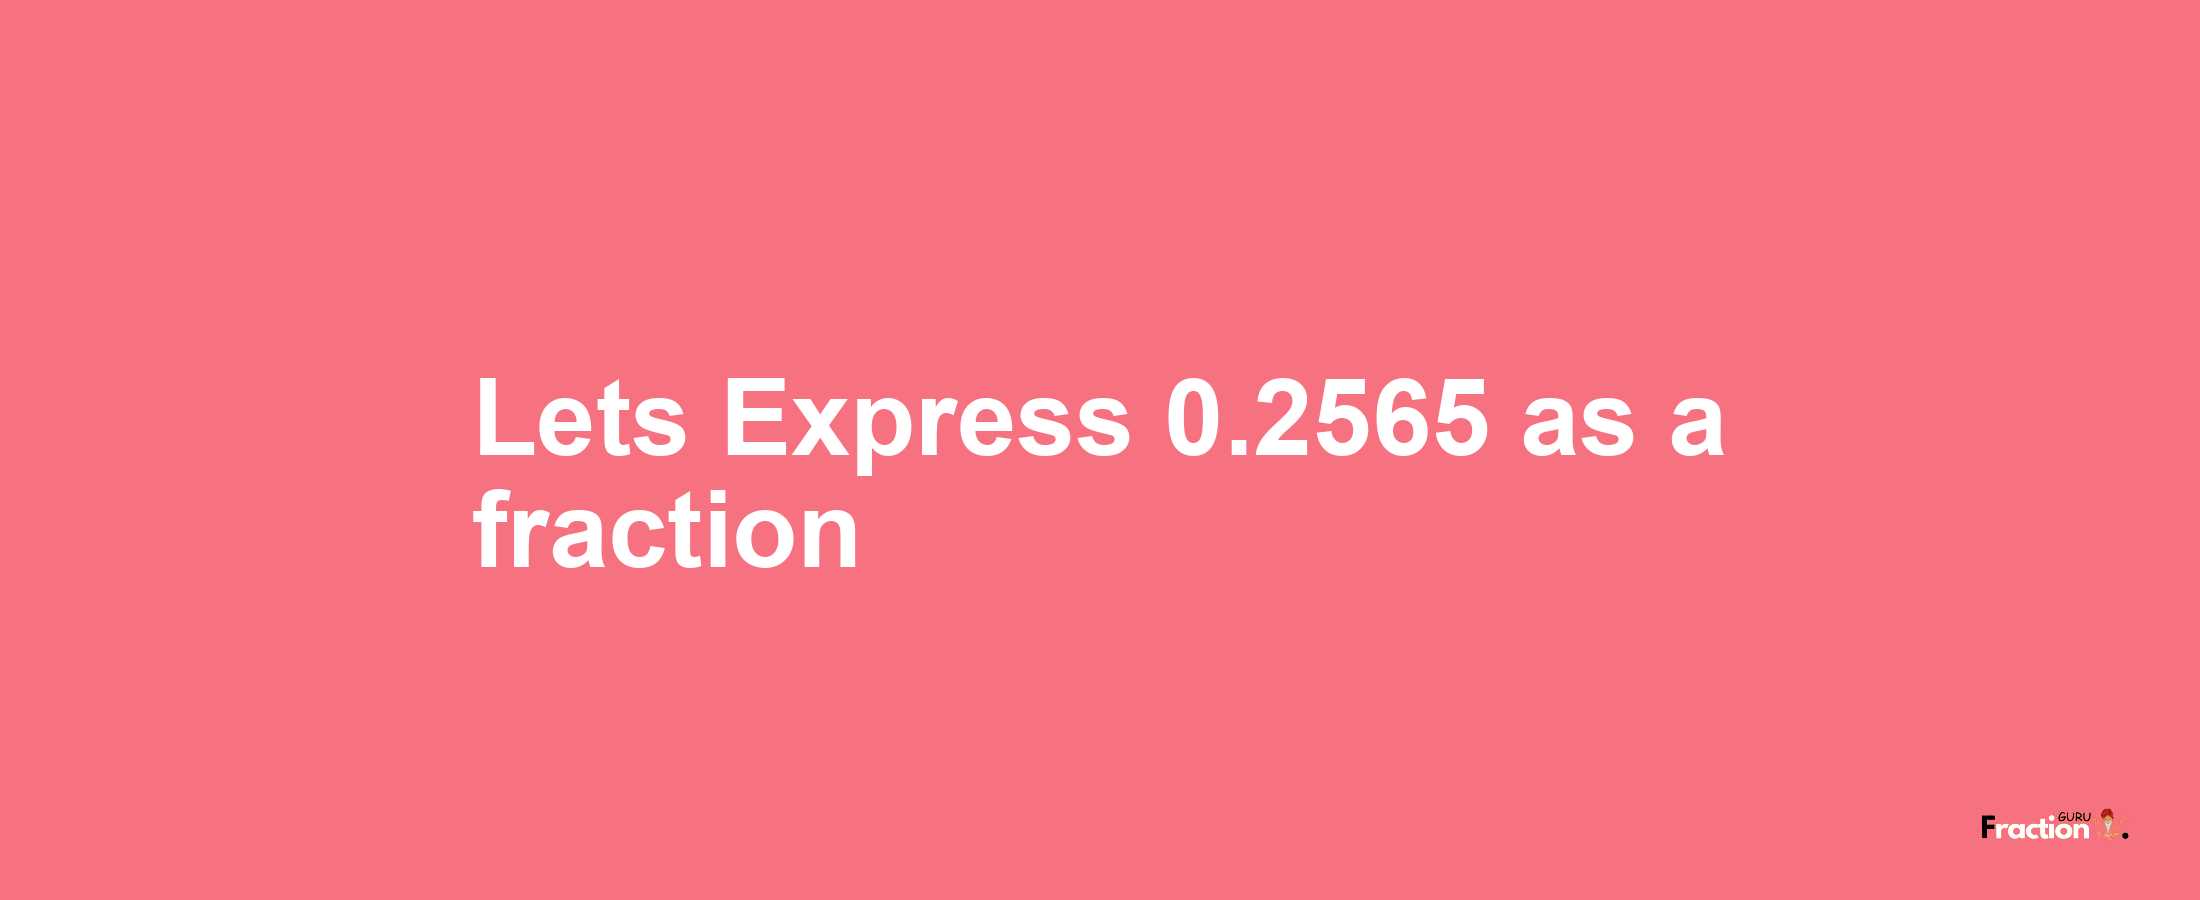 Lets Express 0.2565 as afraction